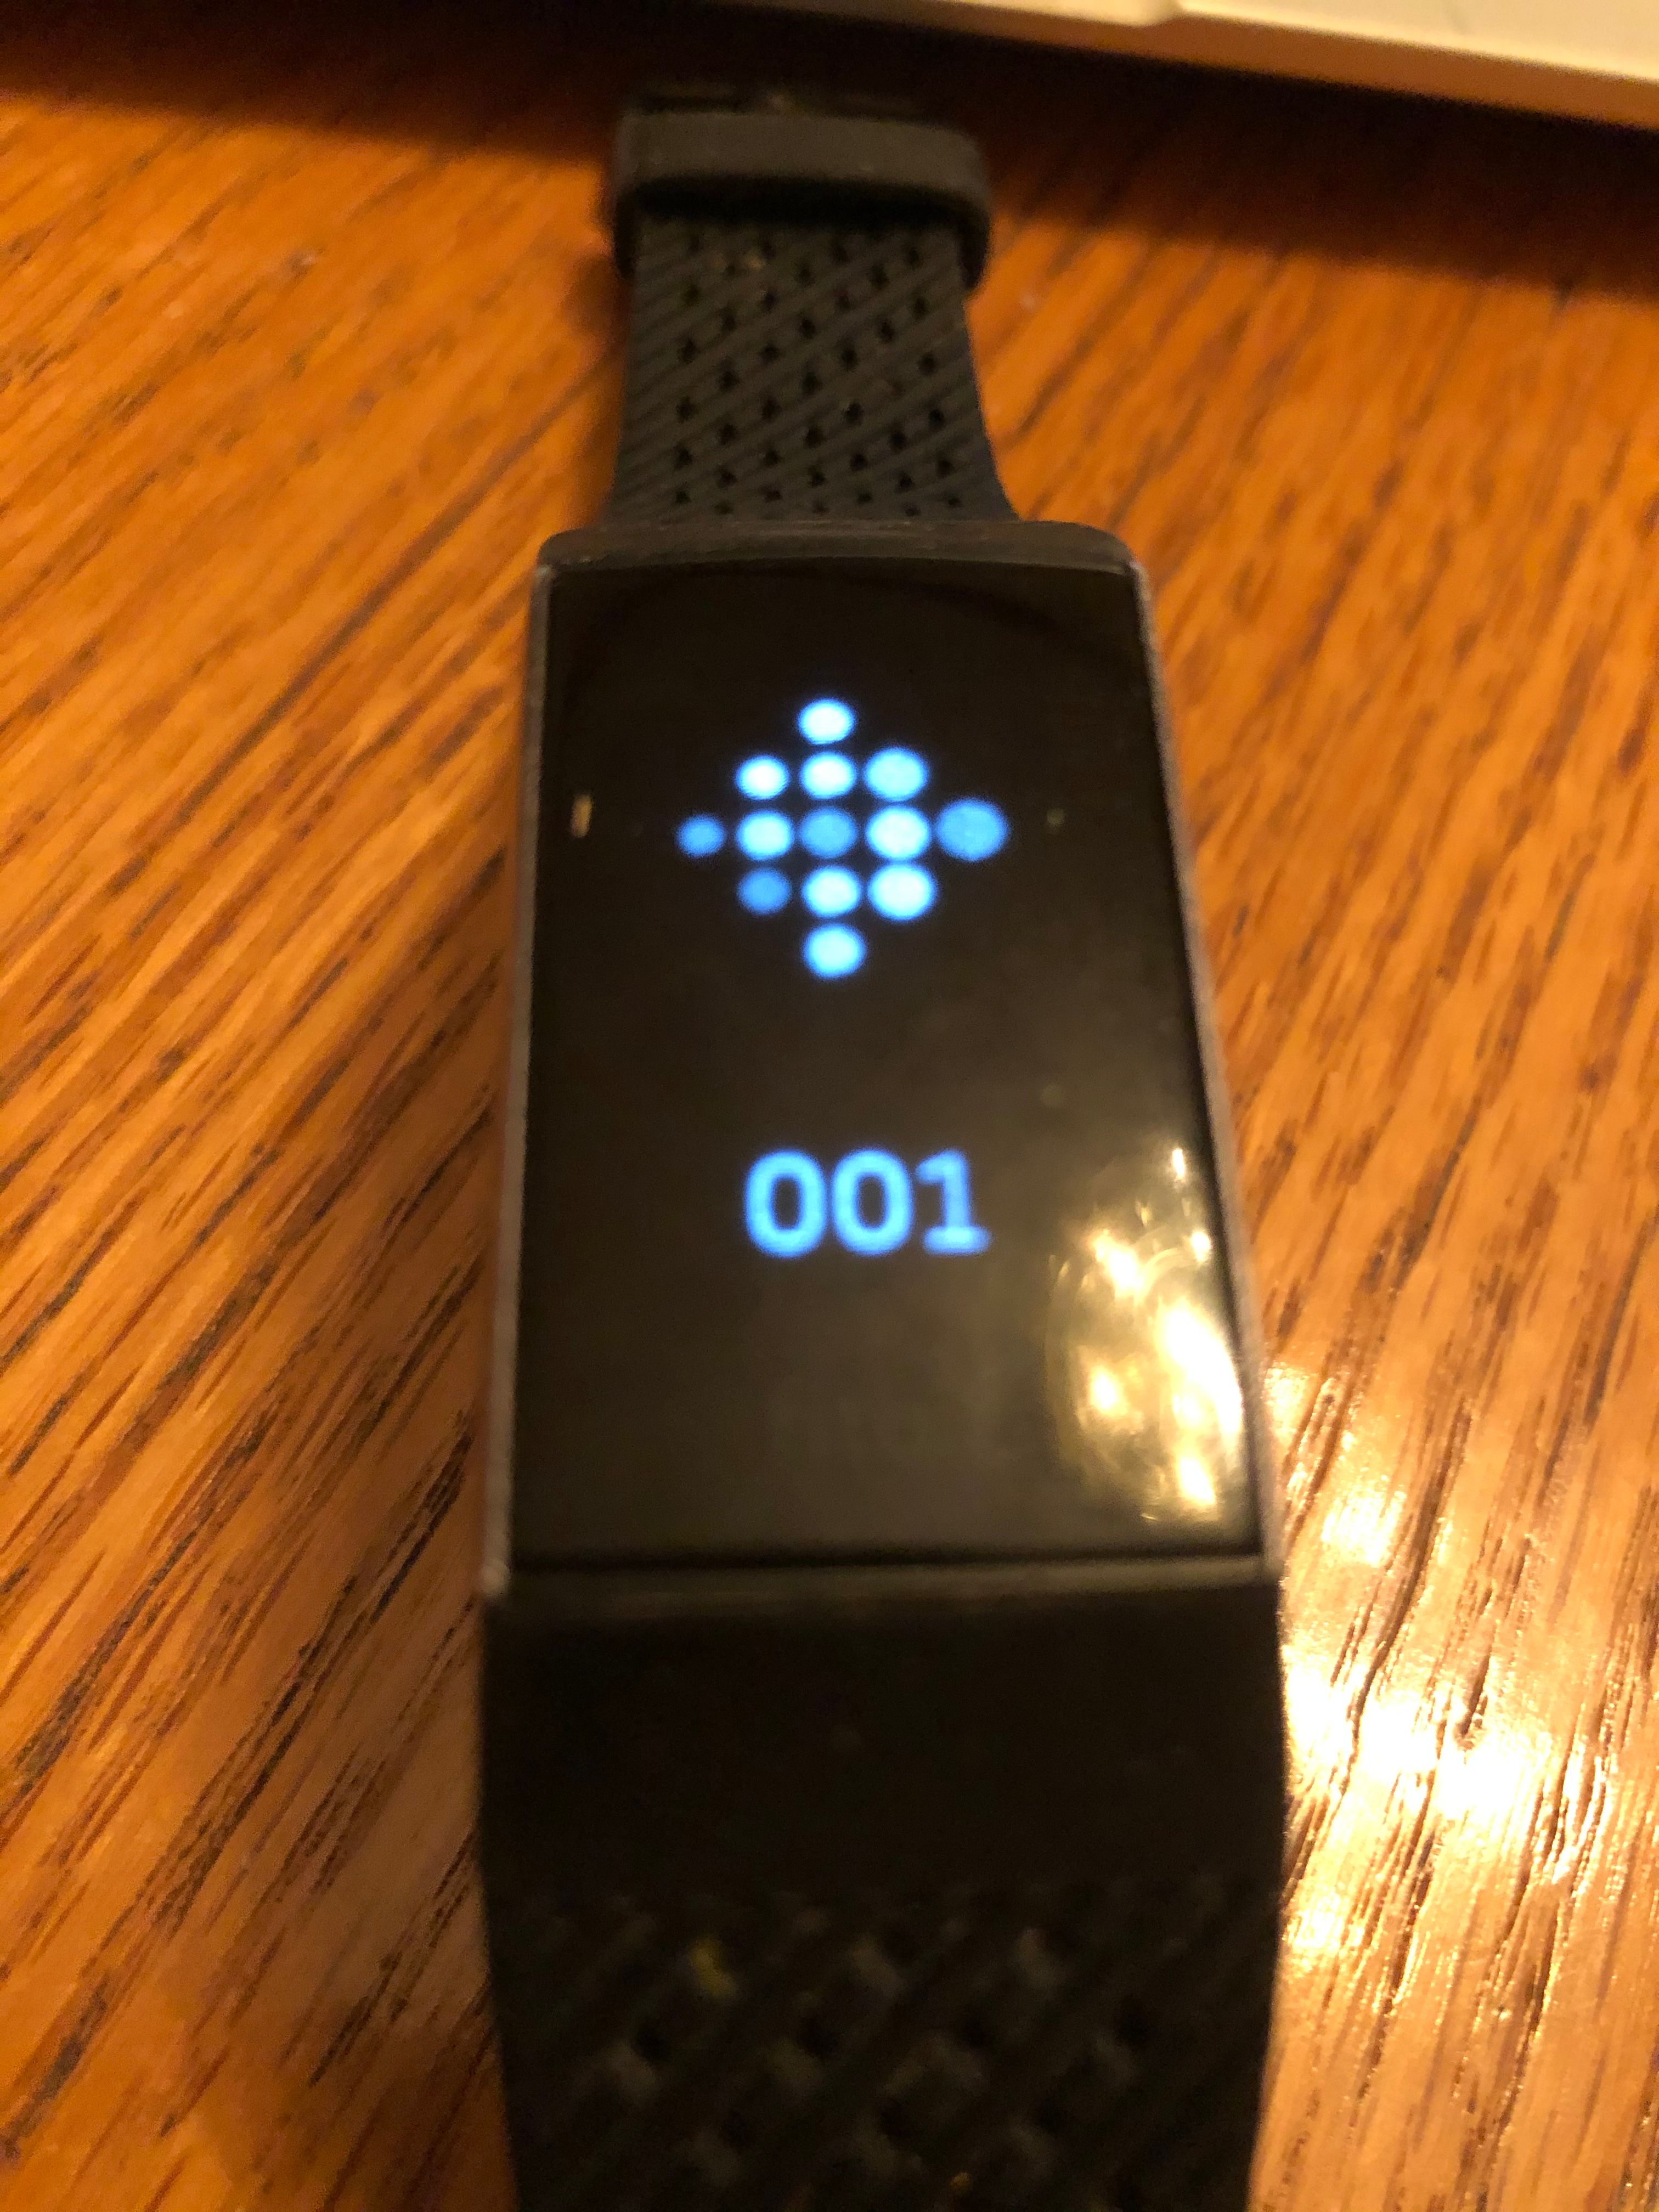 Solved: 001 displayed on Charge 3 